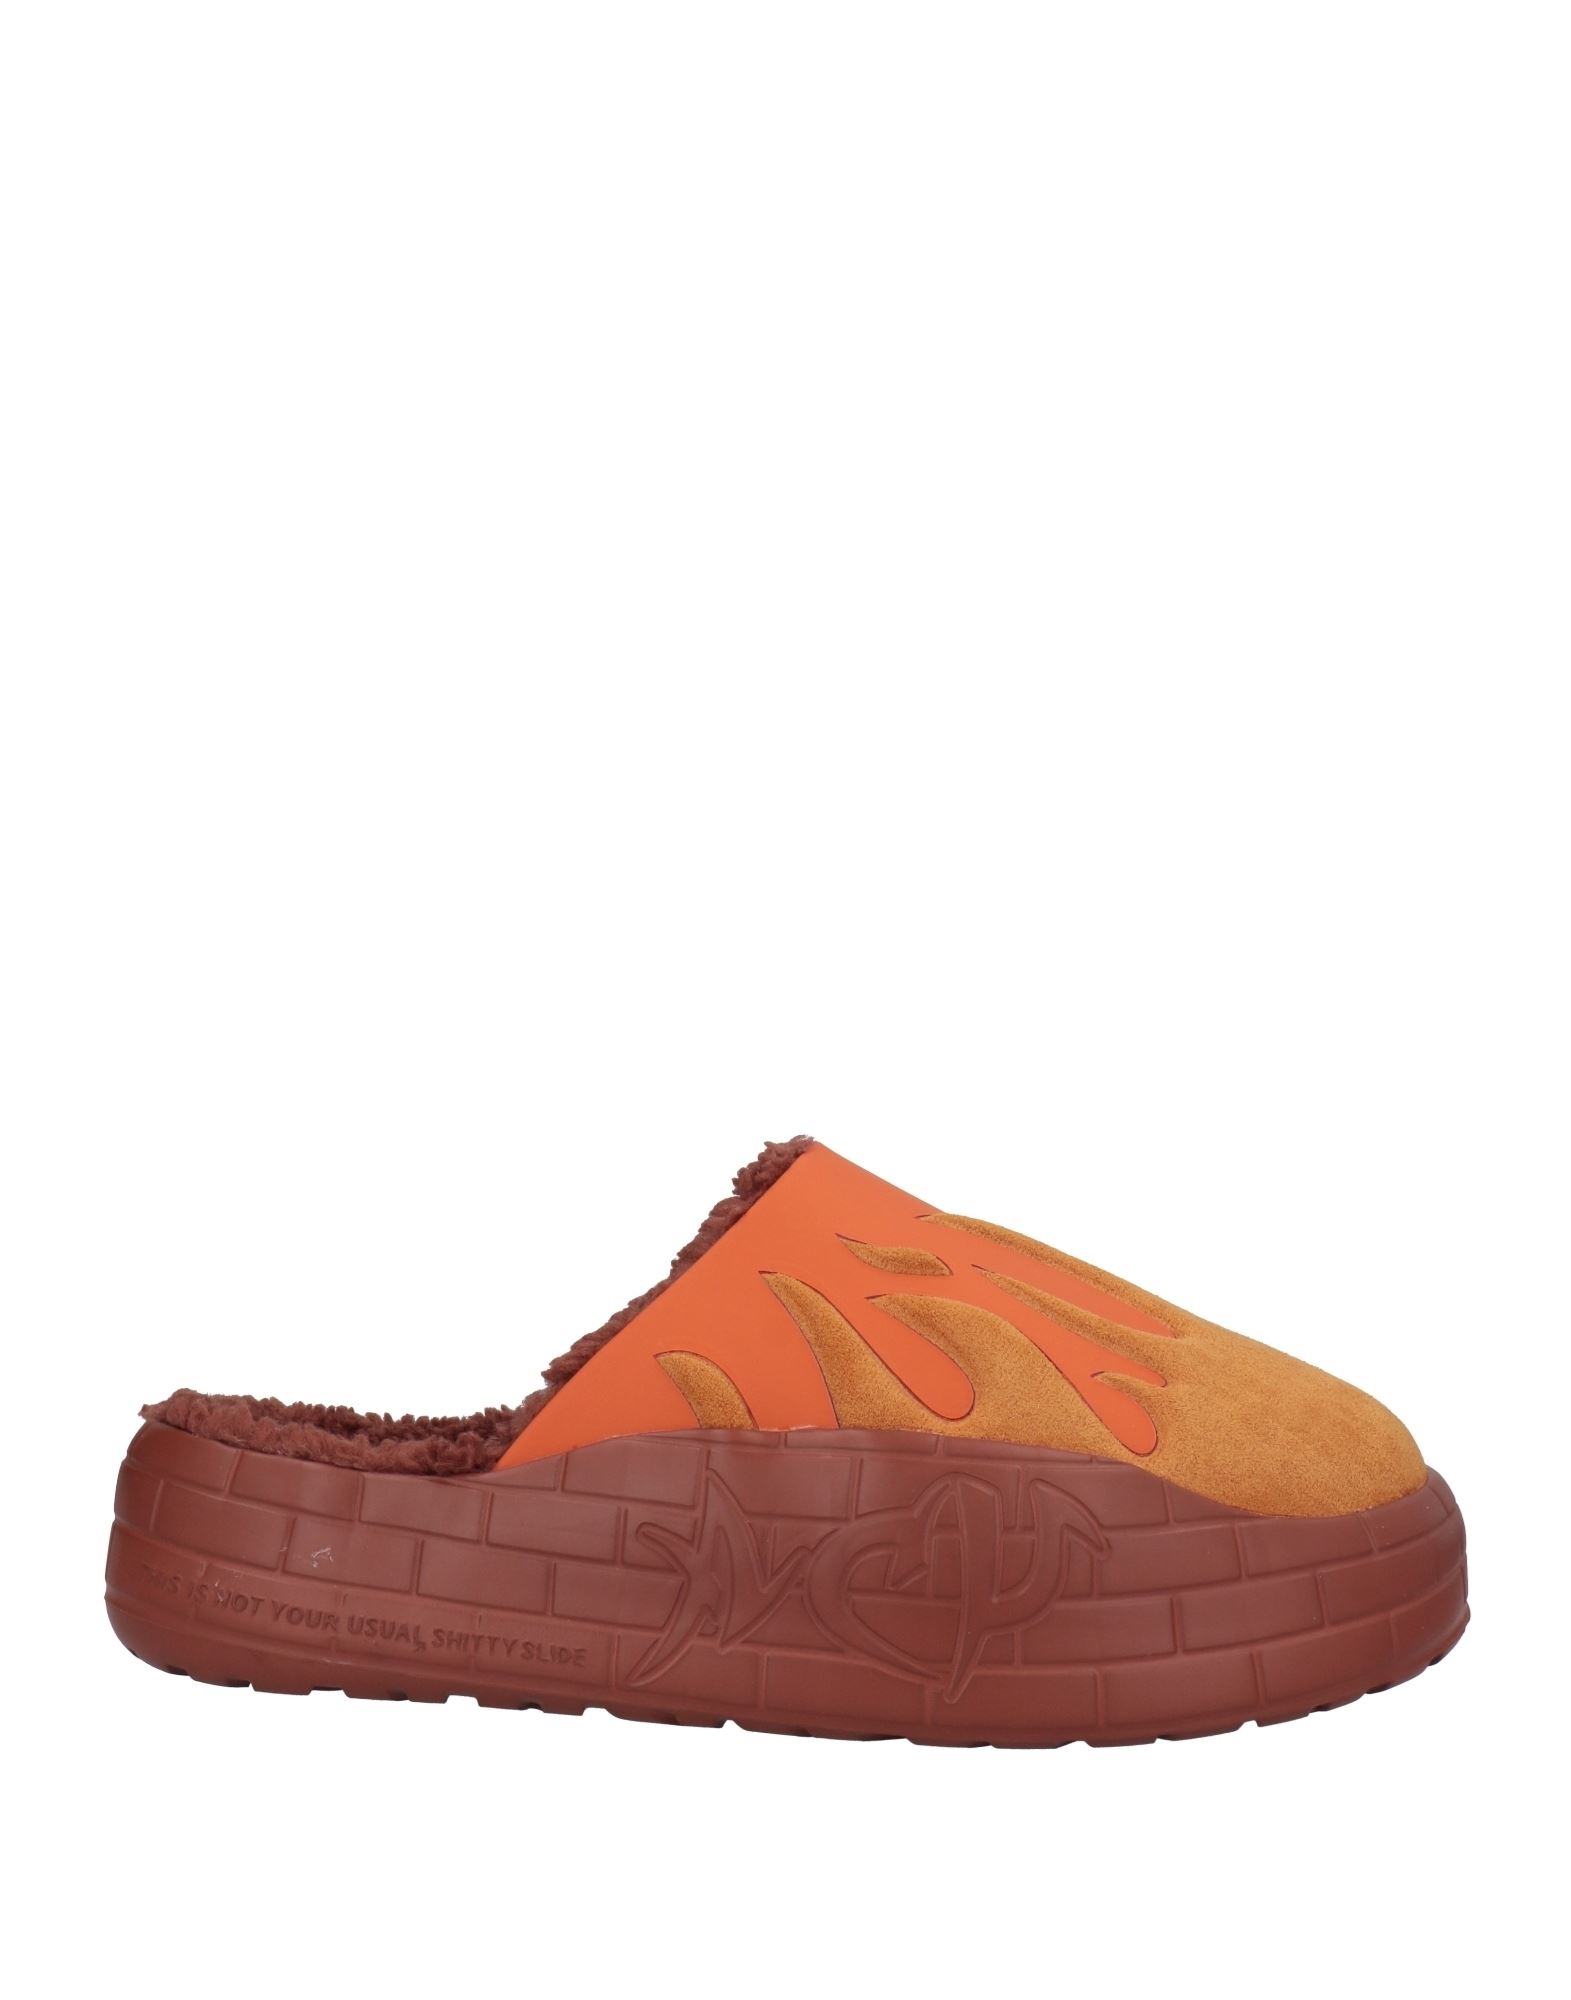 Acupuncture Man Mules & Clogs Orange Size 7.5 Synthetic Fibers